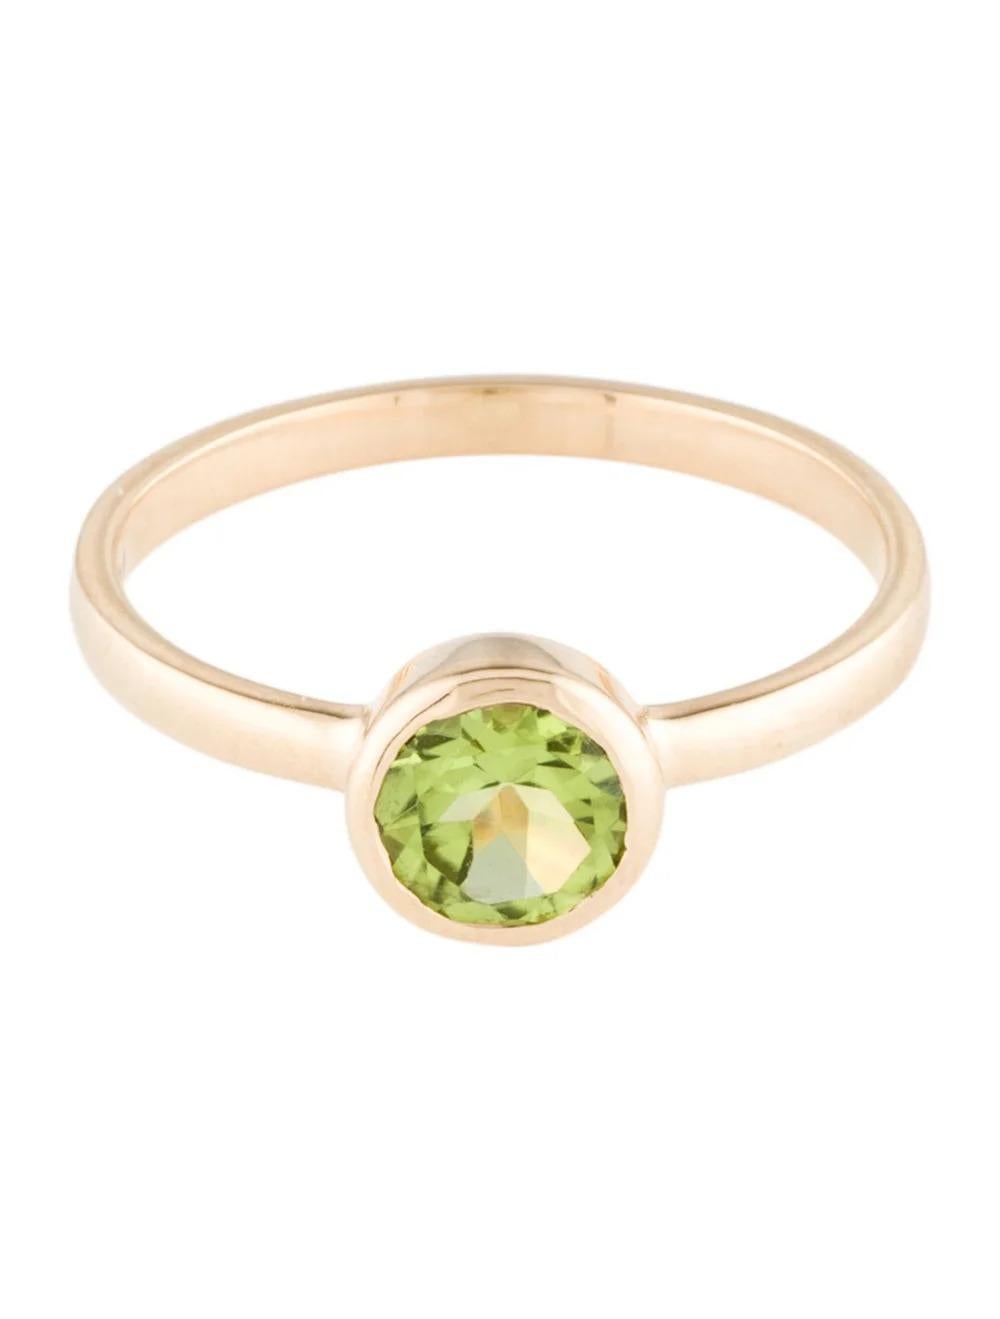 Round Cut 14K Peridot Solitaire Cocktail Ring Size 7, Green Gemstone Vintage, Fine Jewelry For Sale